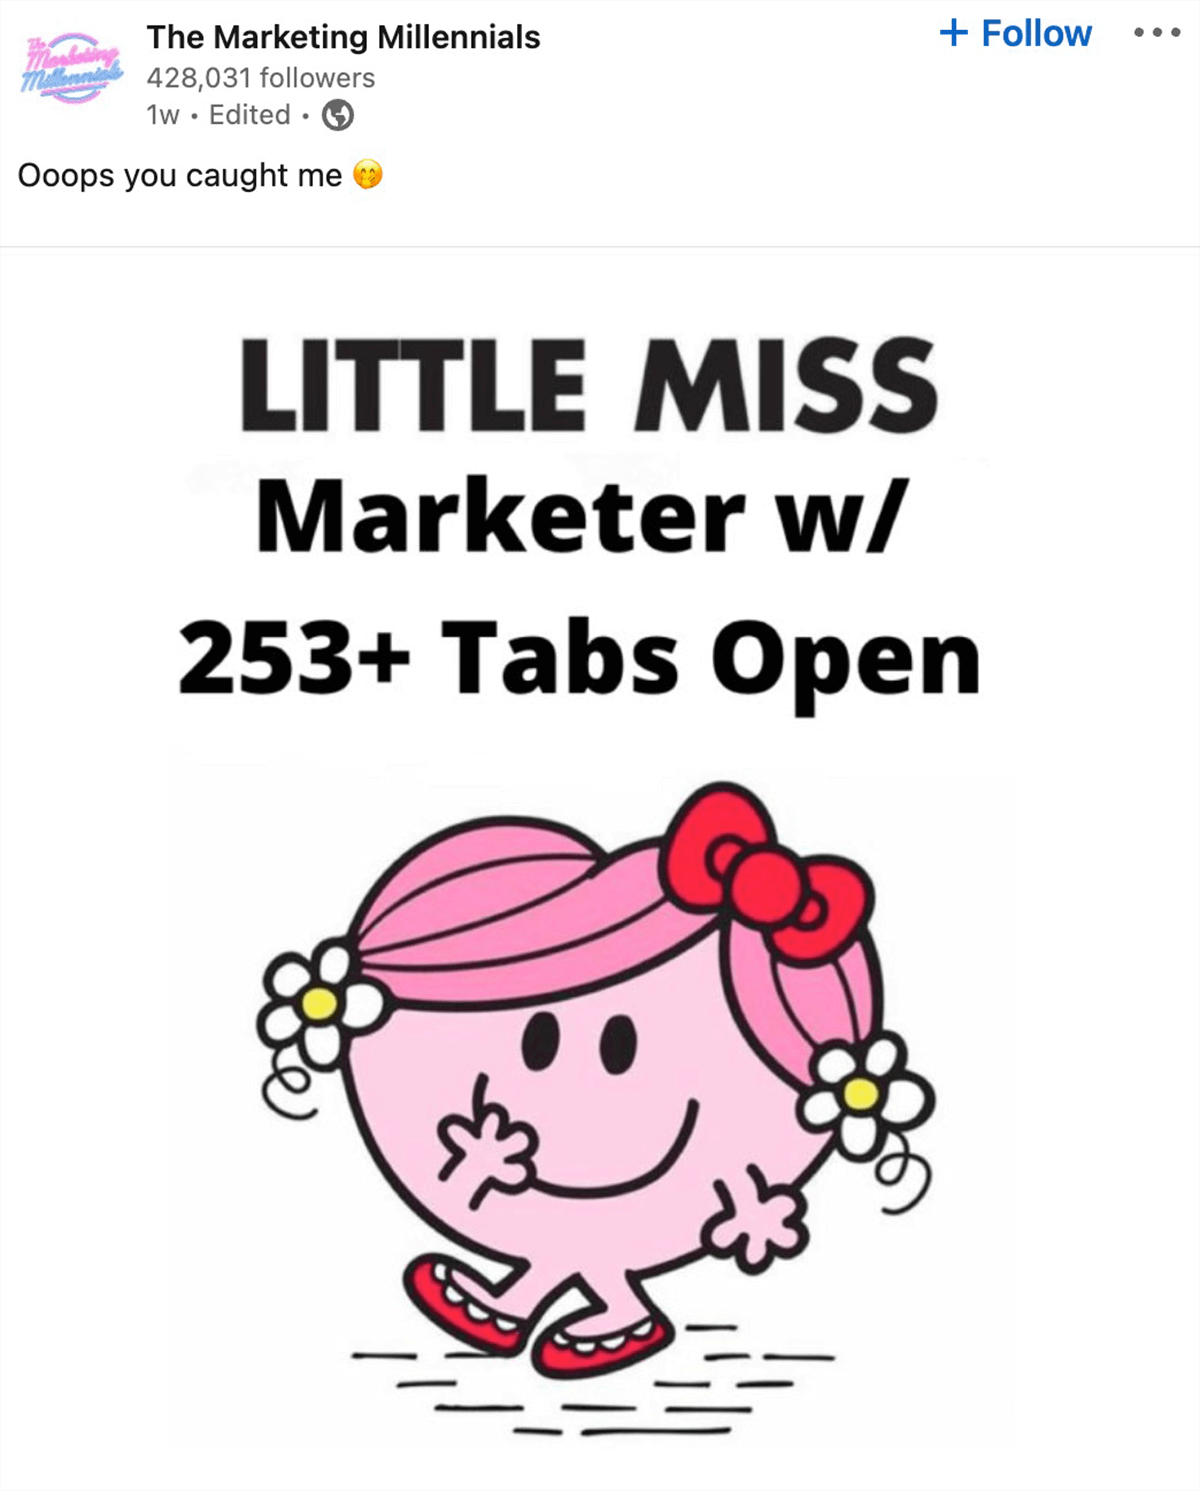 The Marketing Millennials on LinkedIn: Ooops you caught me. Image that says Little Miss Marketer with 253+ tabs open.